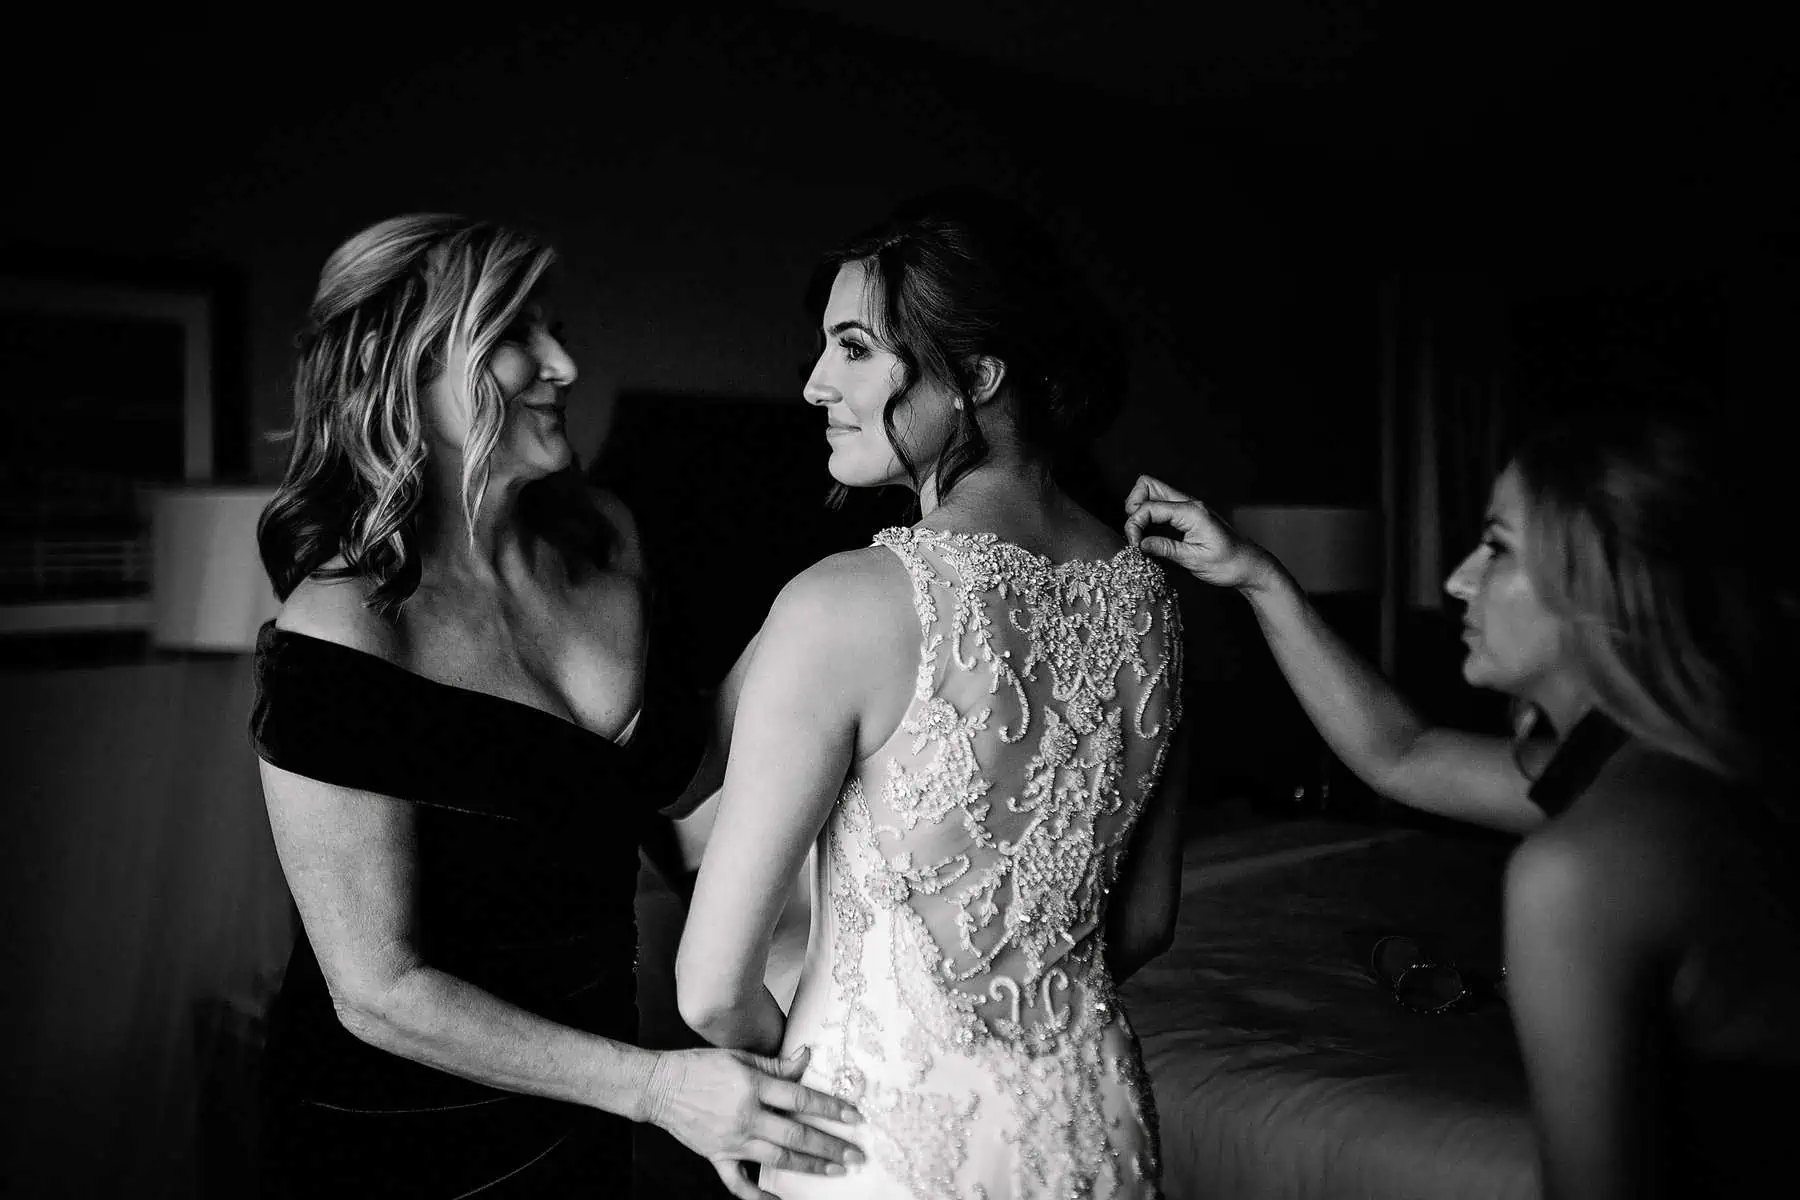 A bride helping her mother put on her wedding dress.